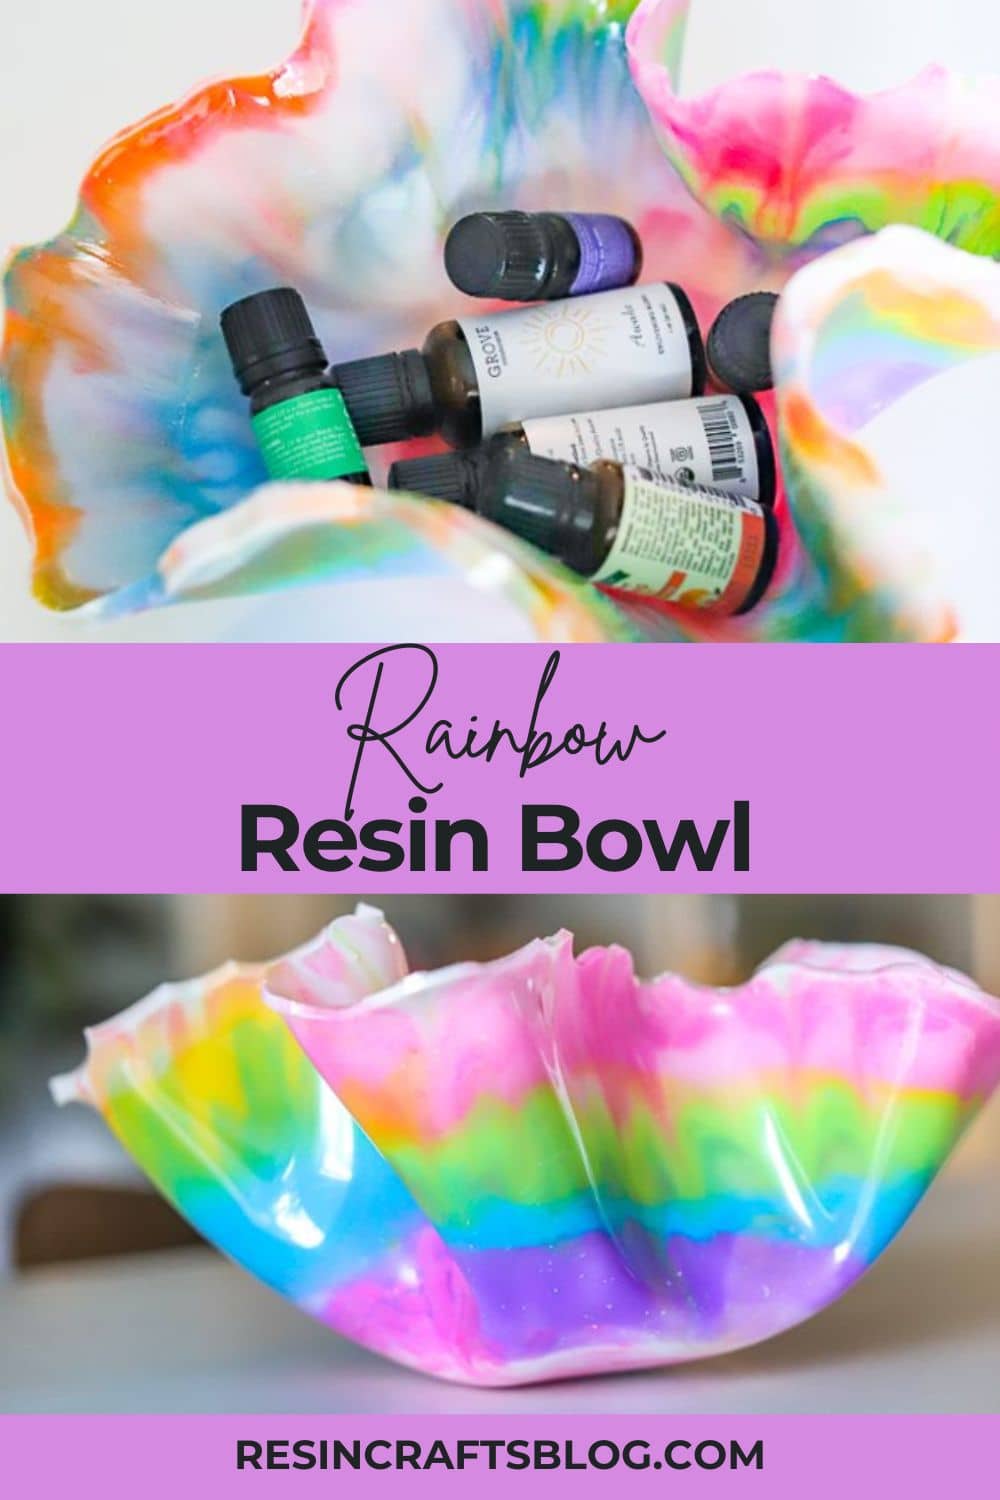 Learn how to create a beautiful DIY resin bowl with Pro Marine Table Top Epoxy! #resin #resincrafts via @resincraftsblog